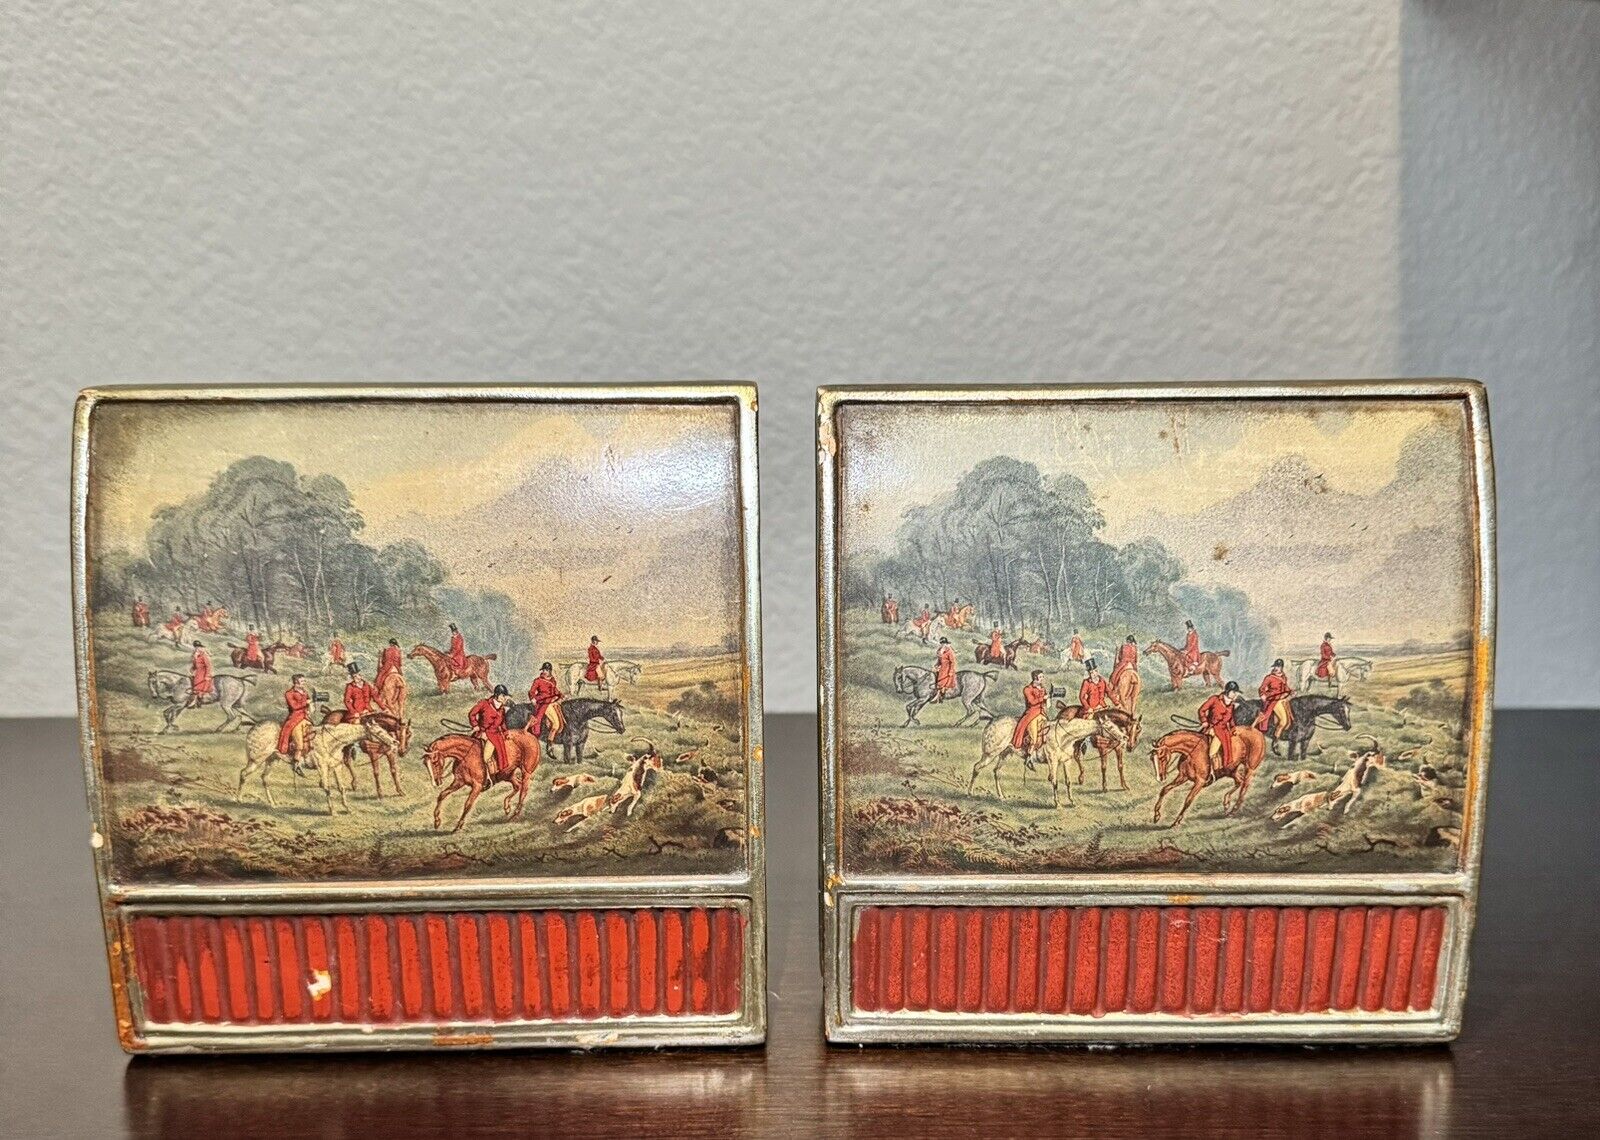 Vintage Borghese Hunting Scene Chalkware Bookends Rare Antique